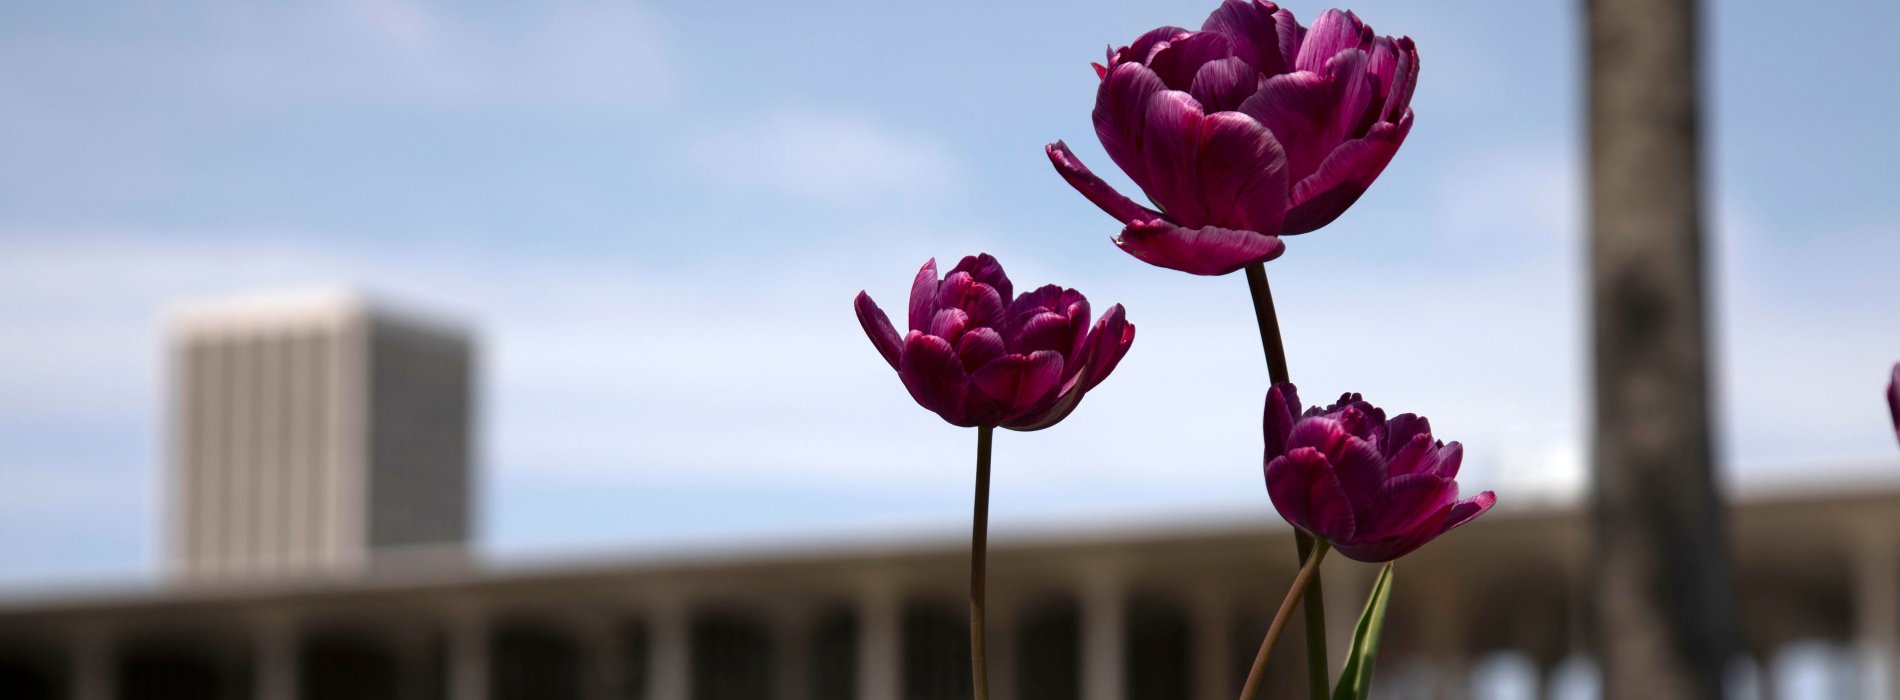 Three purple tulips in the foreground, with a building, greenery and a blue sky in the background.